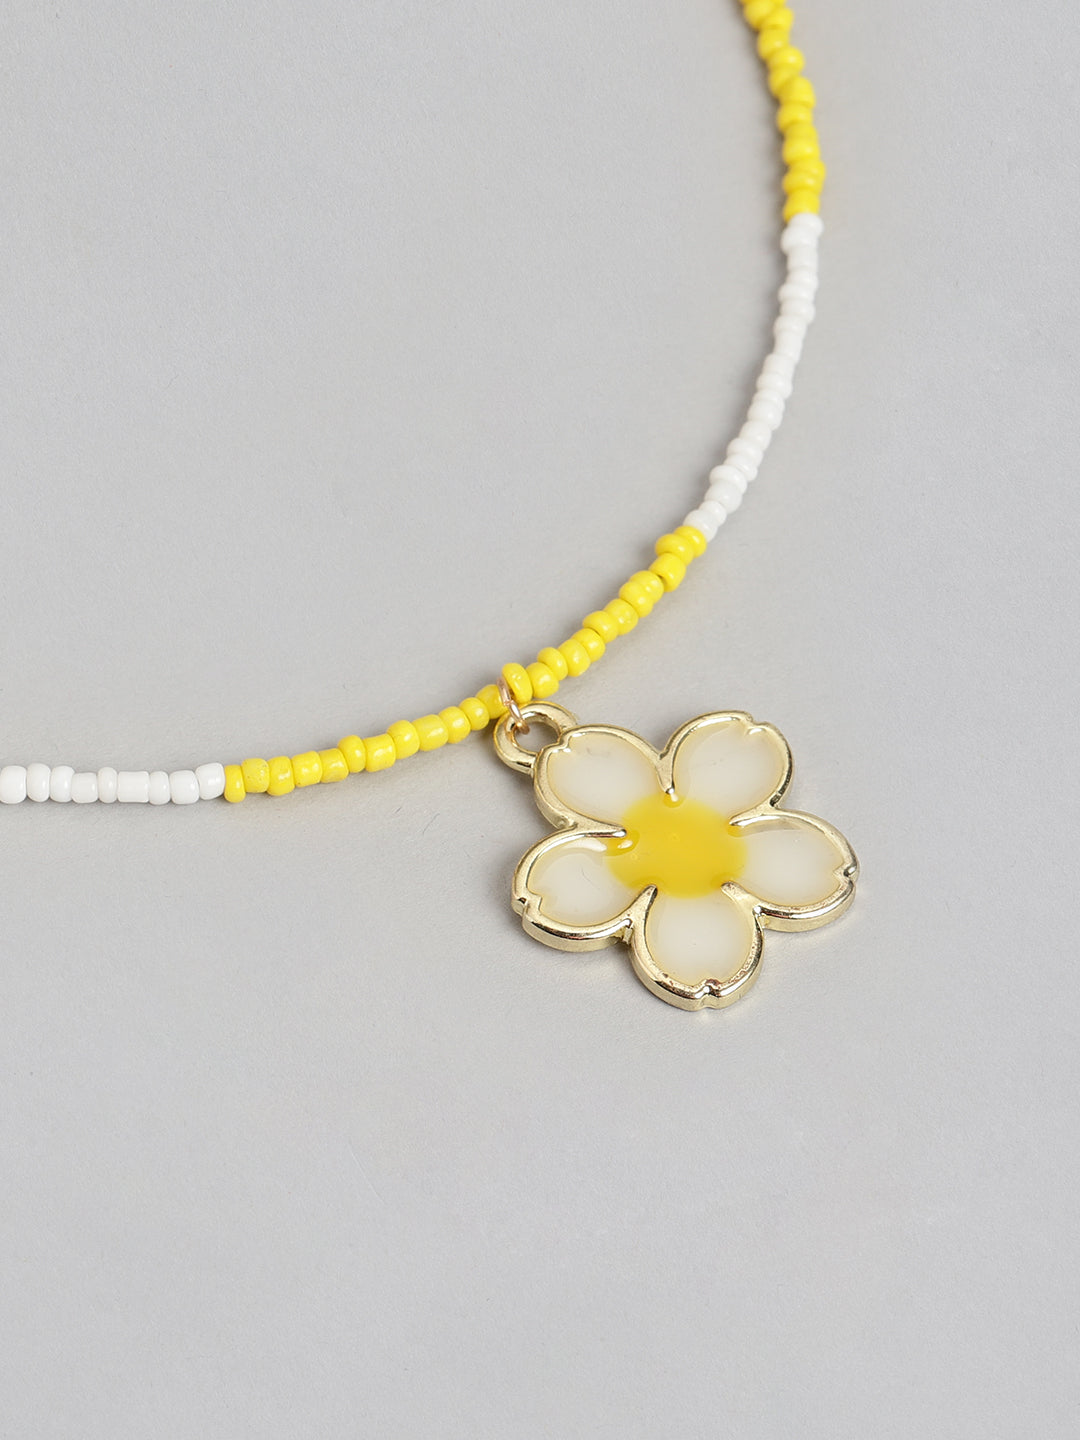 Daisy necklace – Tres Designs Jewelry